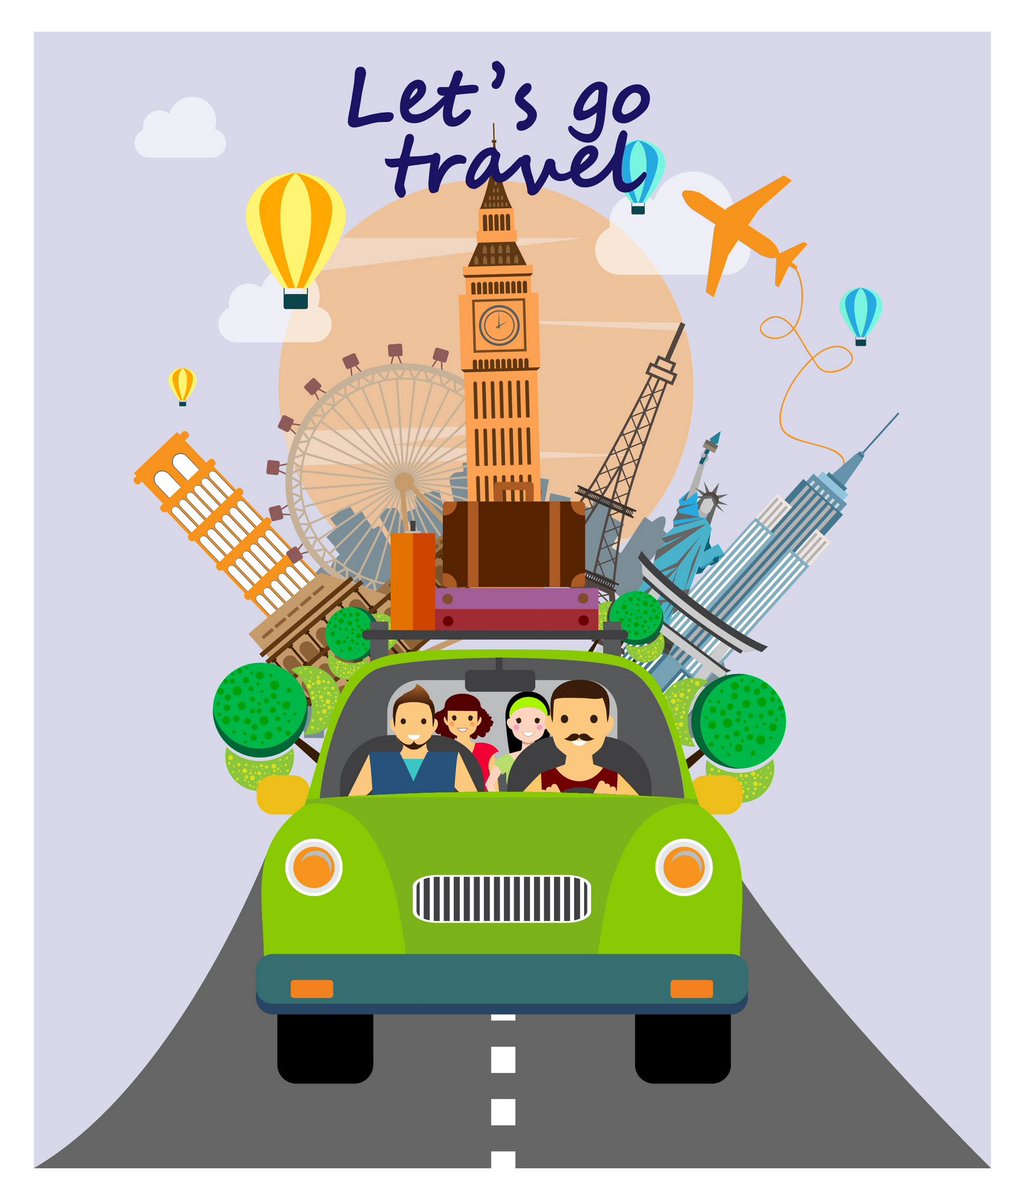 🚗 Ready to roam Europe? 

Rent a car and unlock the wonders of iconic destinations like Paris, Rome, Barcelona, and more! 
Your adventure awaits on the open road.🌍🏞️ 

discord.com/S9uA2jqEVx

#CarRentals #NexAuto #MultiversX